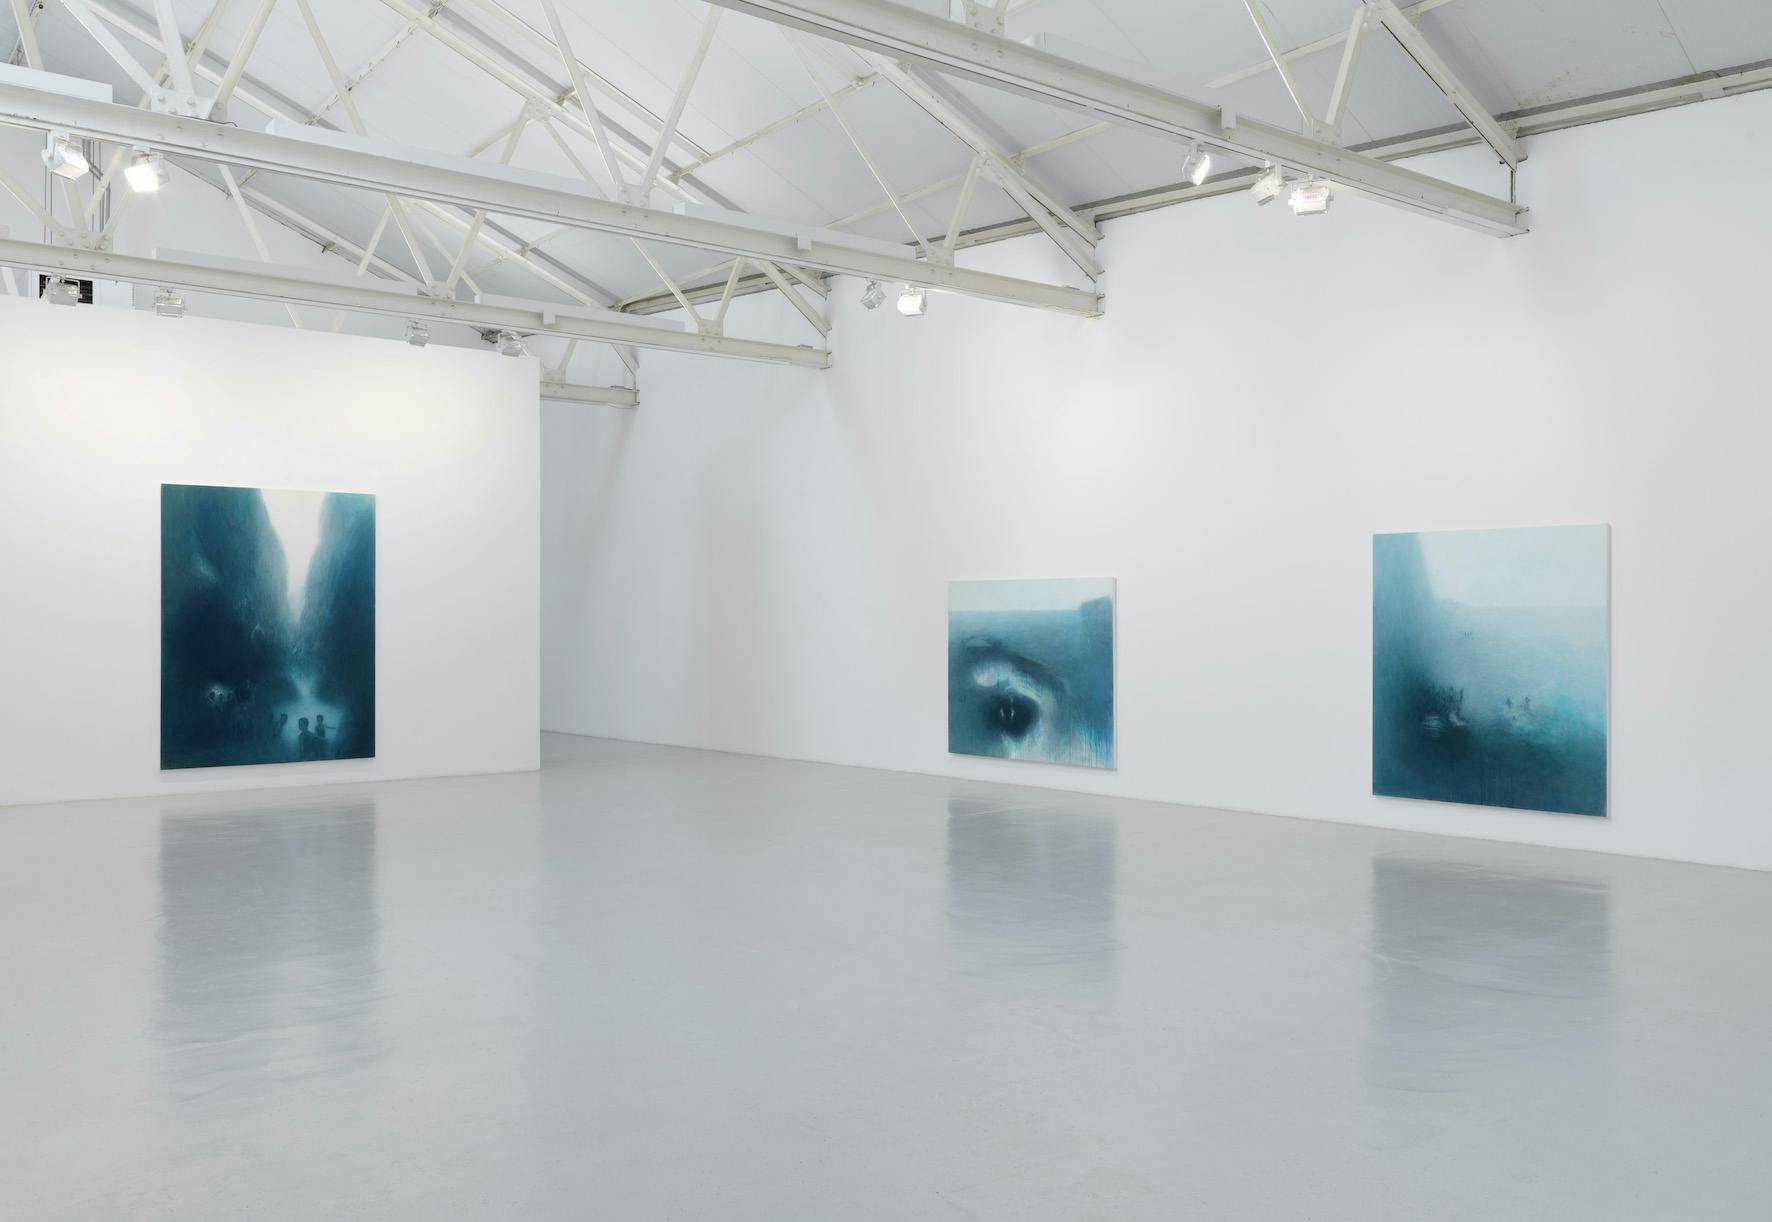 Azyl/Azul, a series of seven landscape paintings by Dee Ferris, at Corvi-Mora. Image courtesy the artist and Corvi-Mora. Photo: Marcus Leith